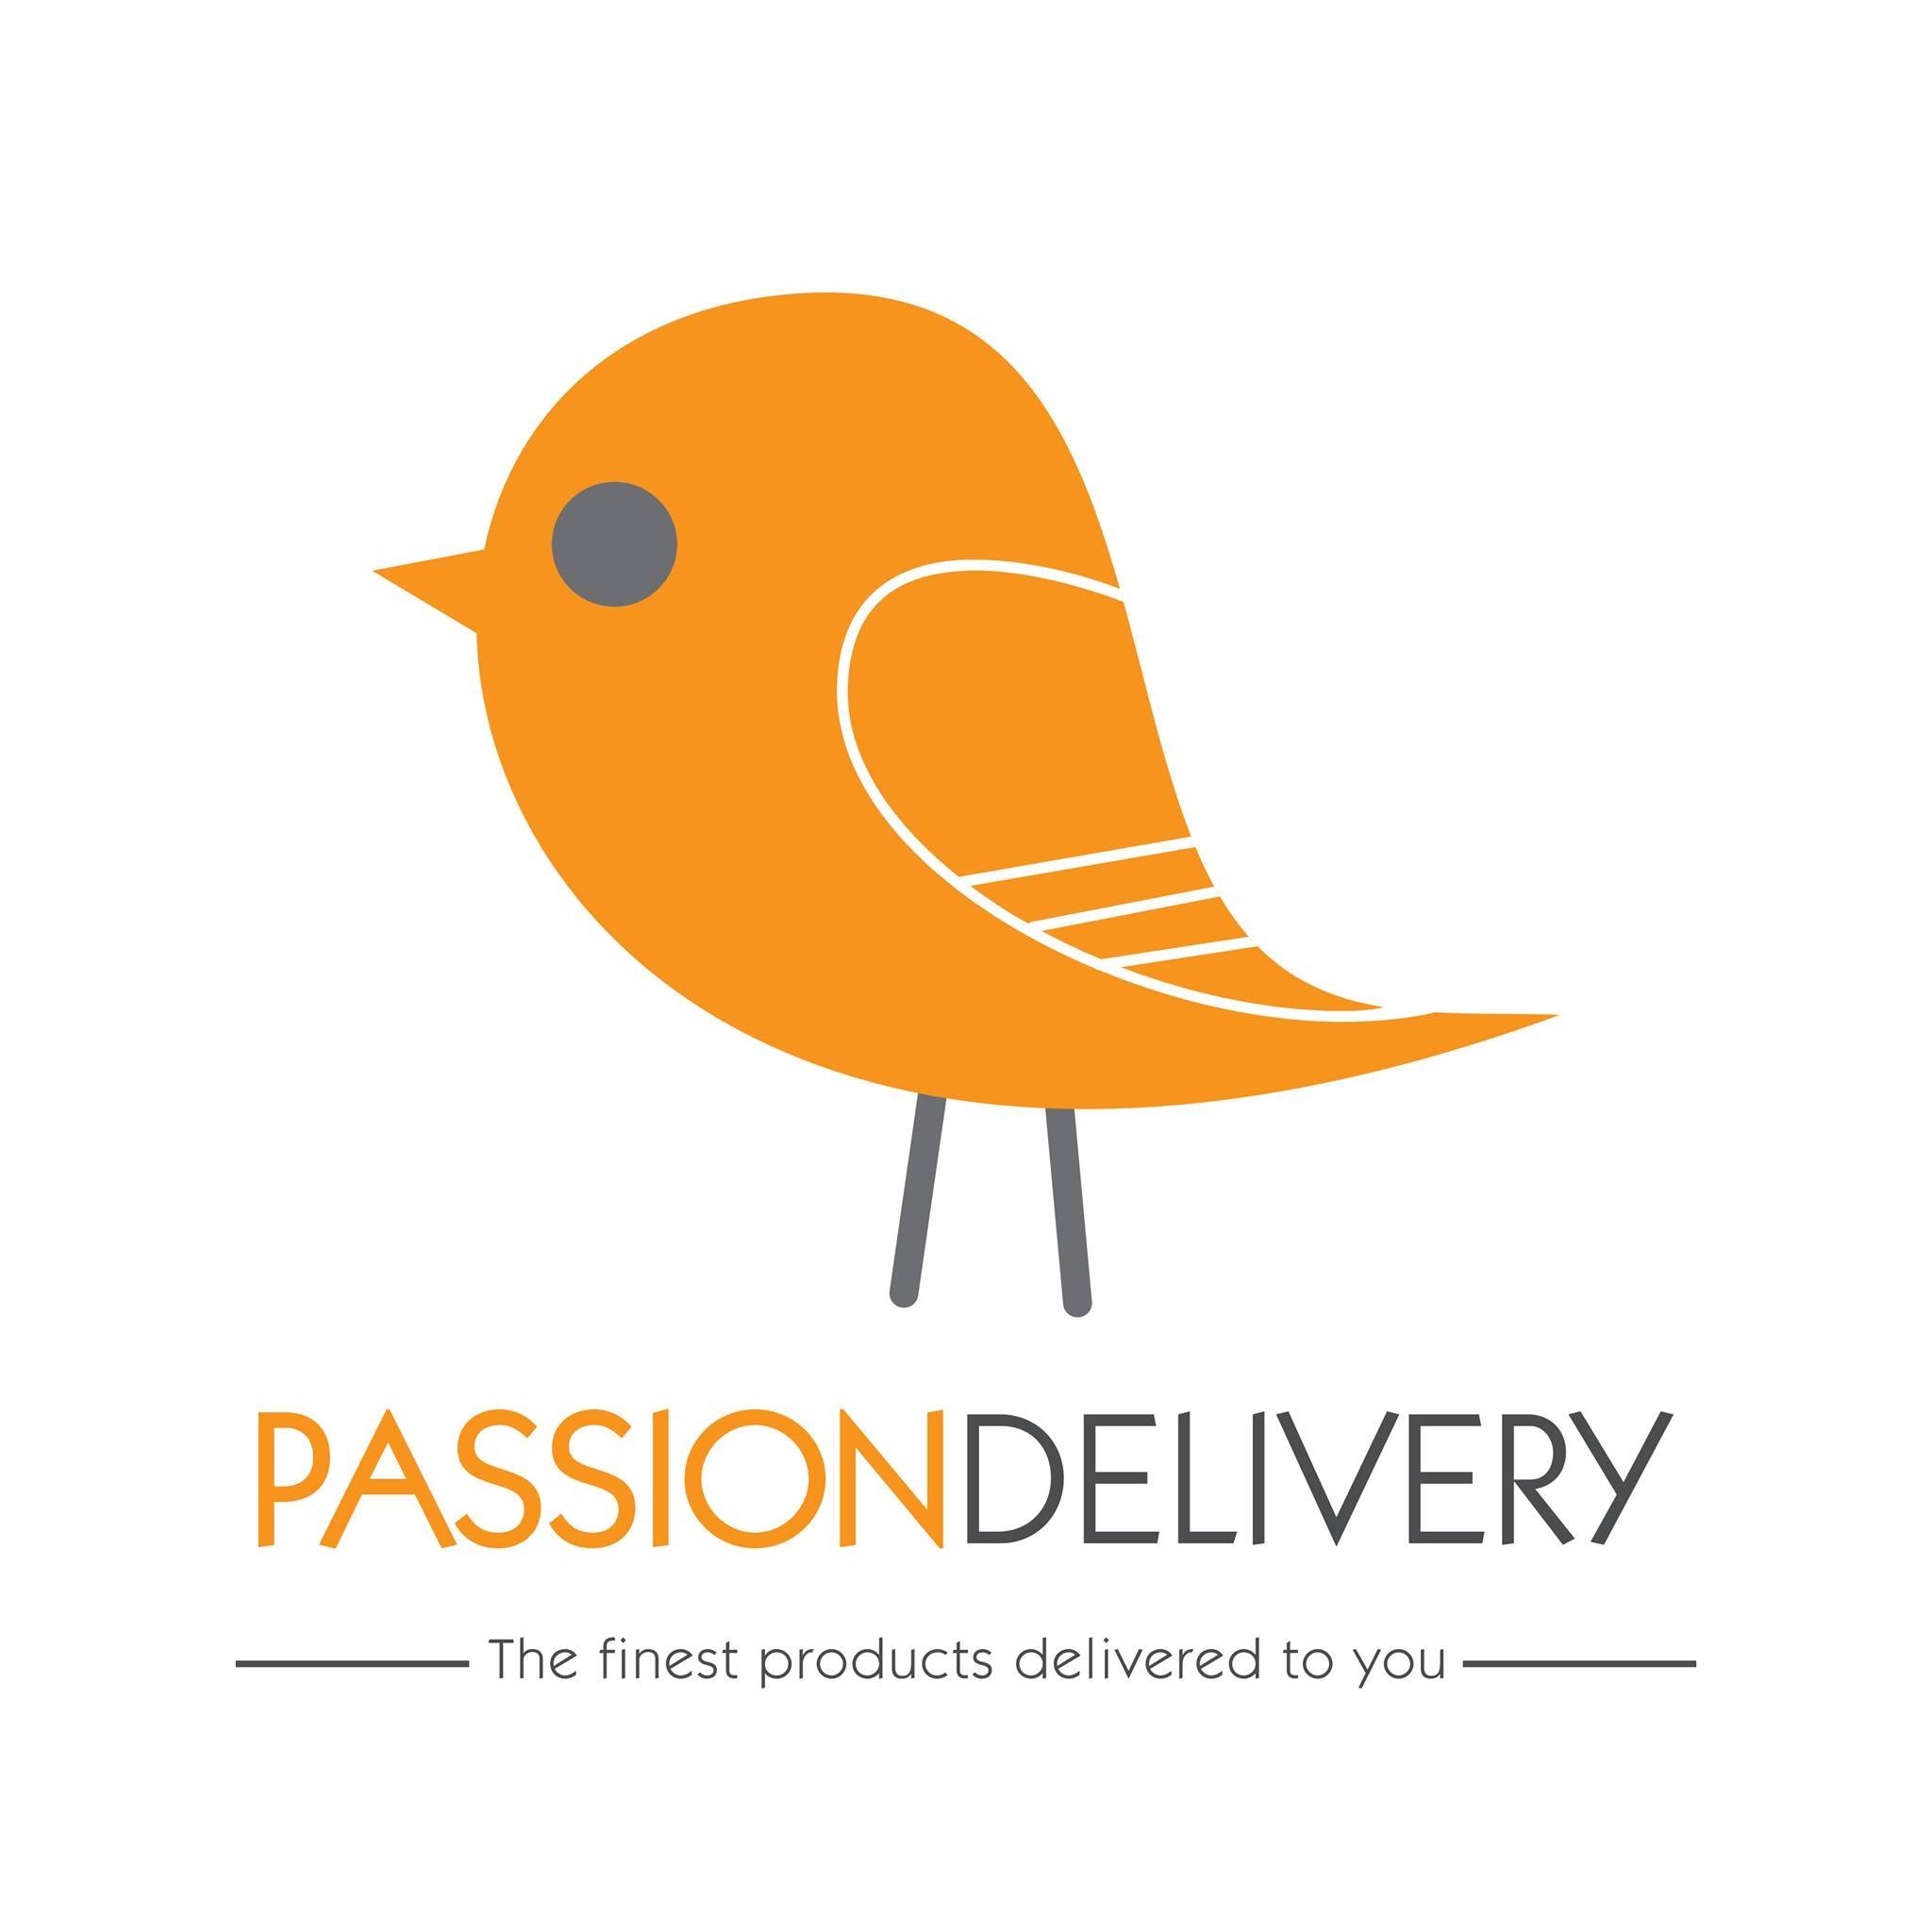 Passion delivery logo